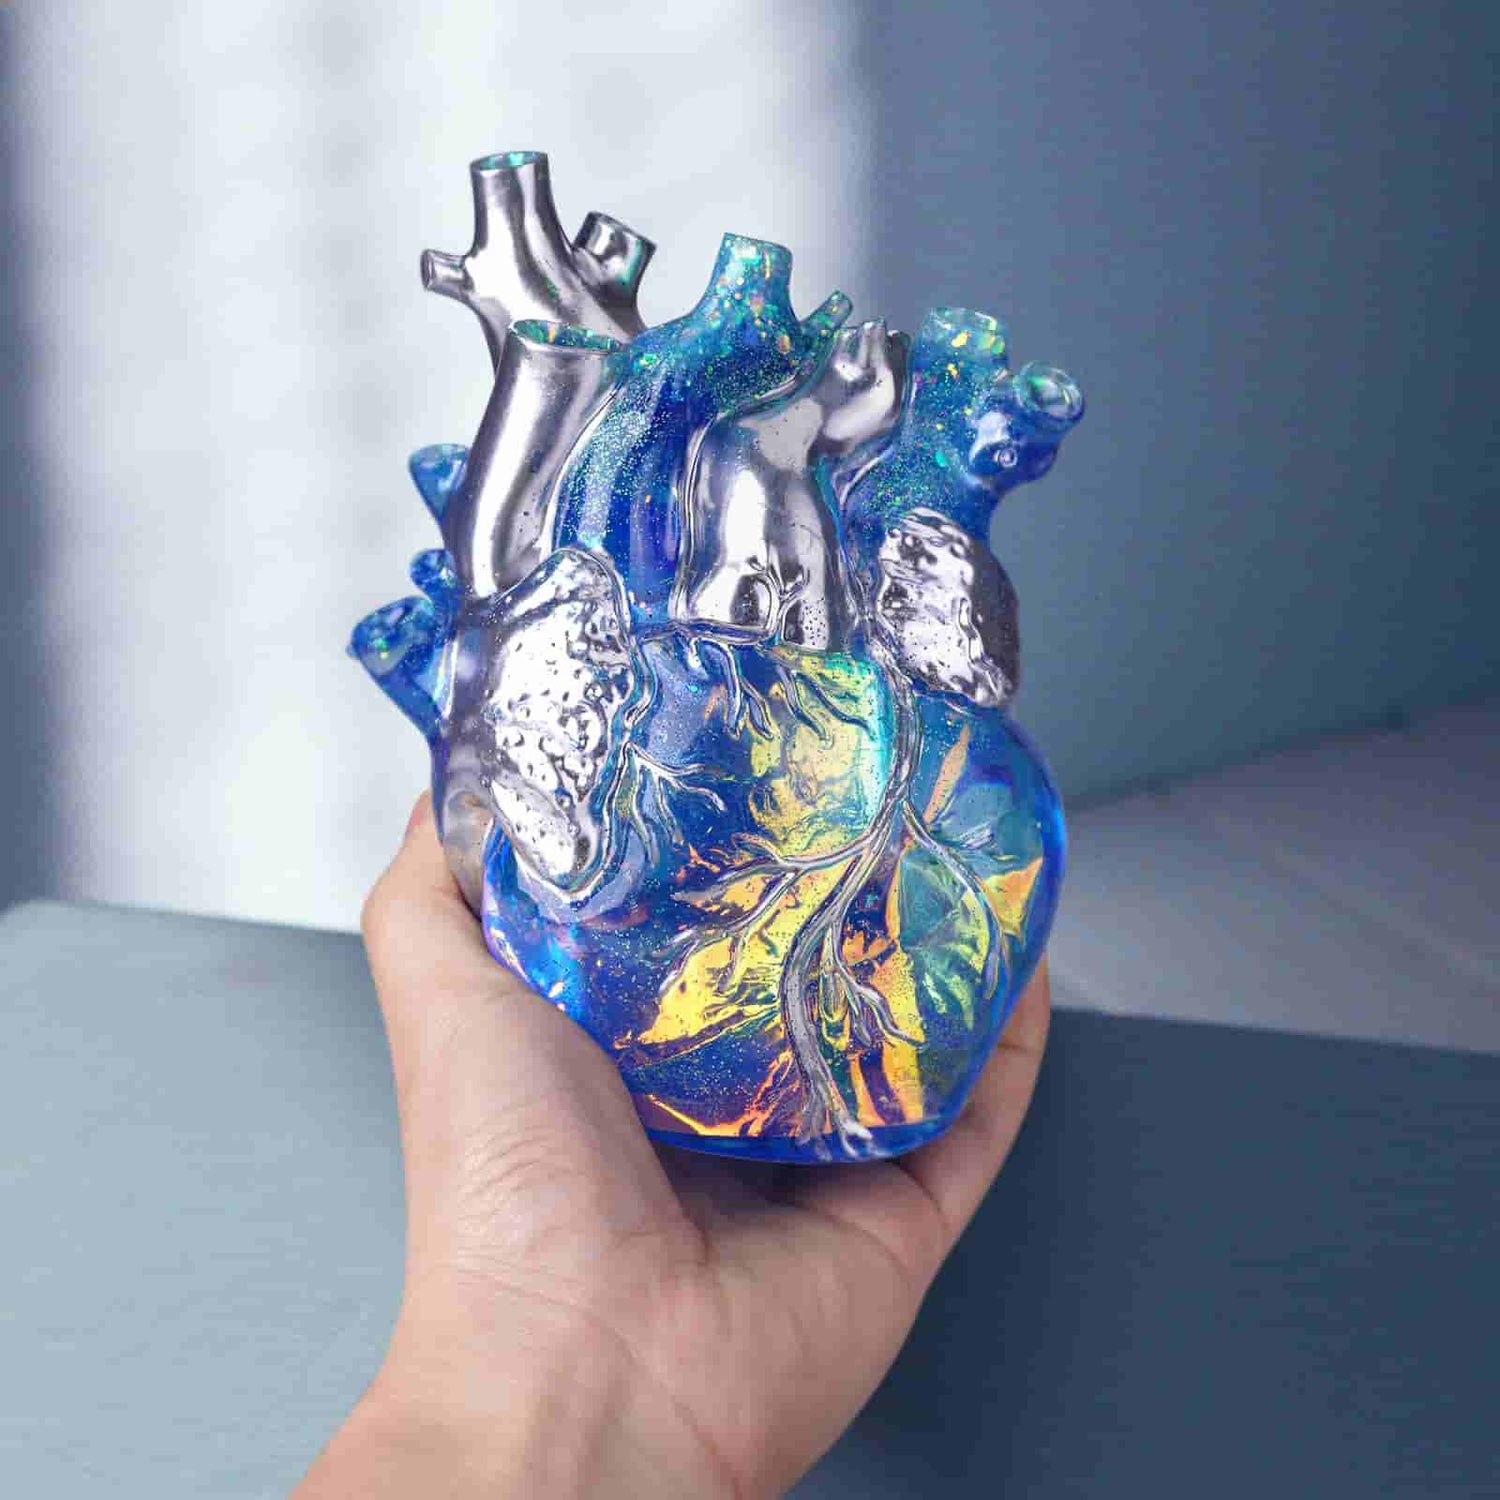  LET'S RESIN Heart Resin Molds, Anatomical Heart Resin Molds  Silicone Large with Thoughtful Details, Silicone Molds for Epoxy Resin, DIY  Art Craft, Doctor, Nurse Valentine's Day Gift : Arts, Crafts 